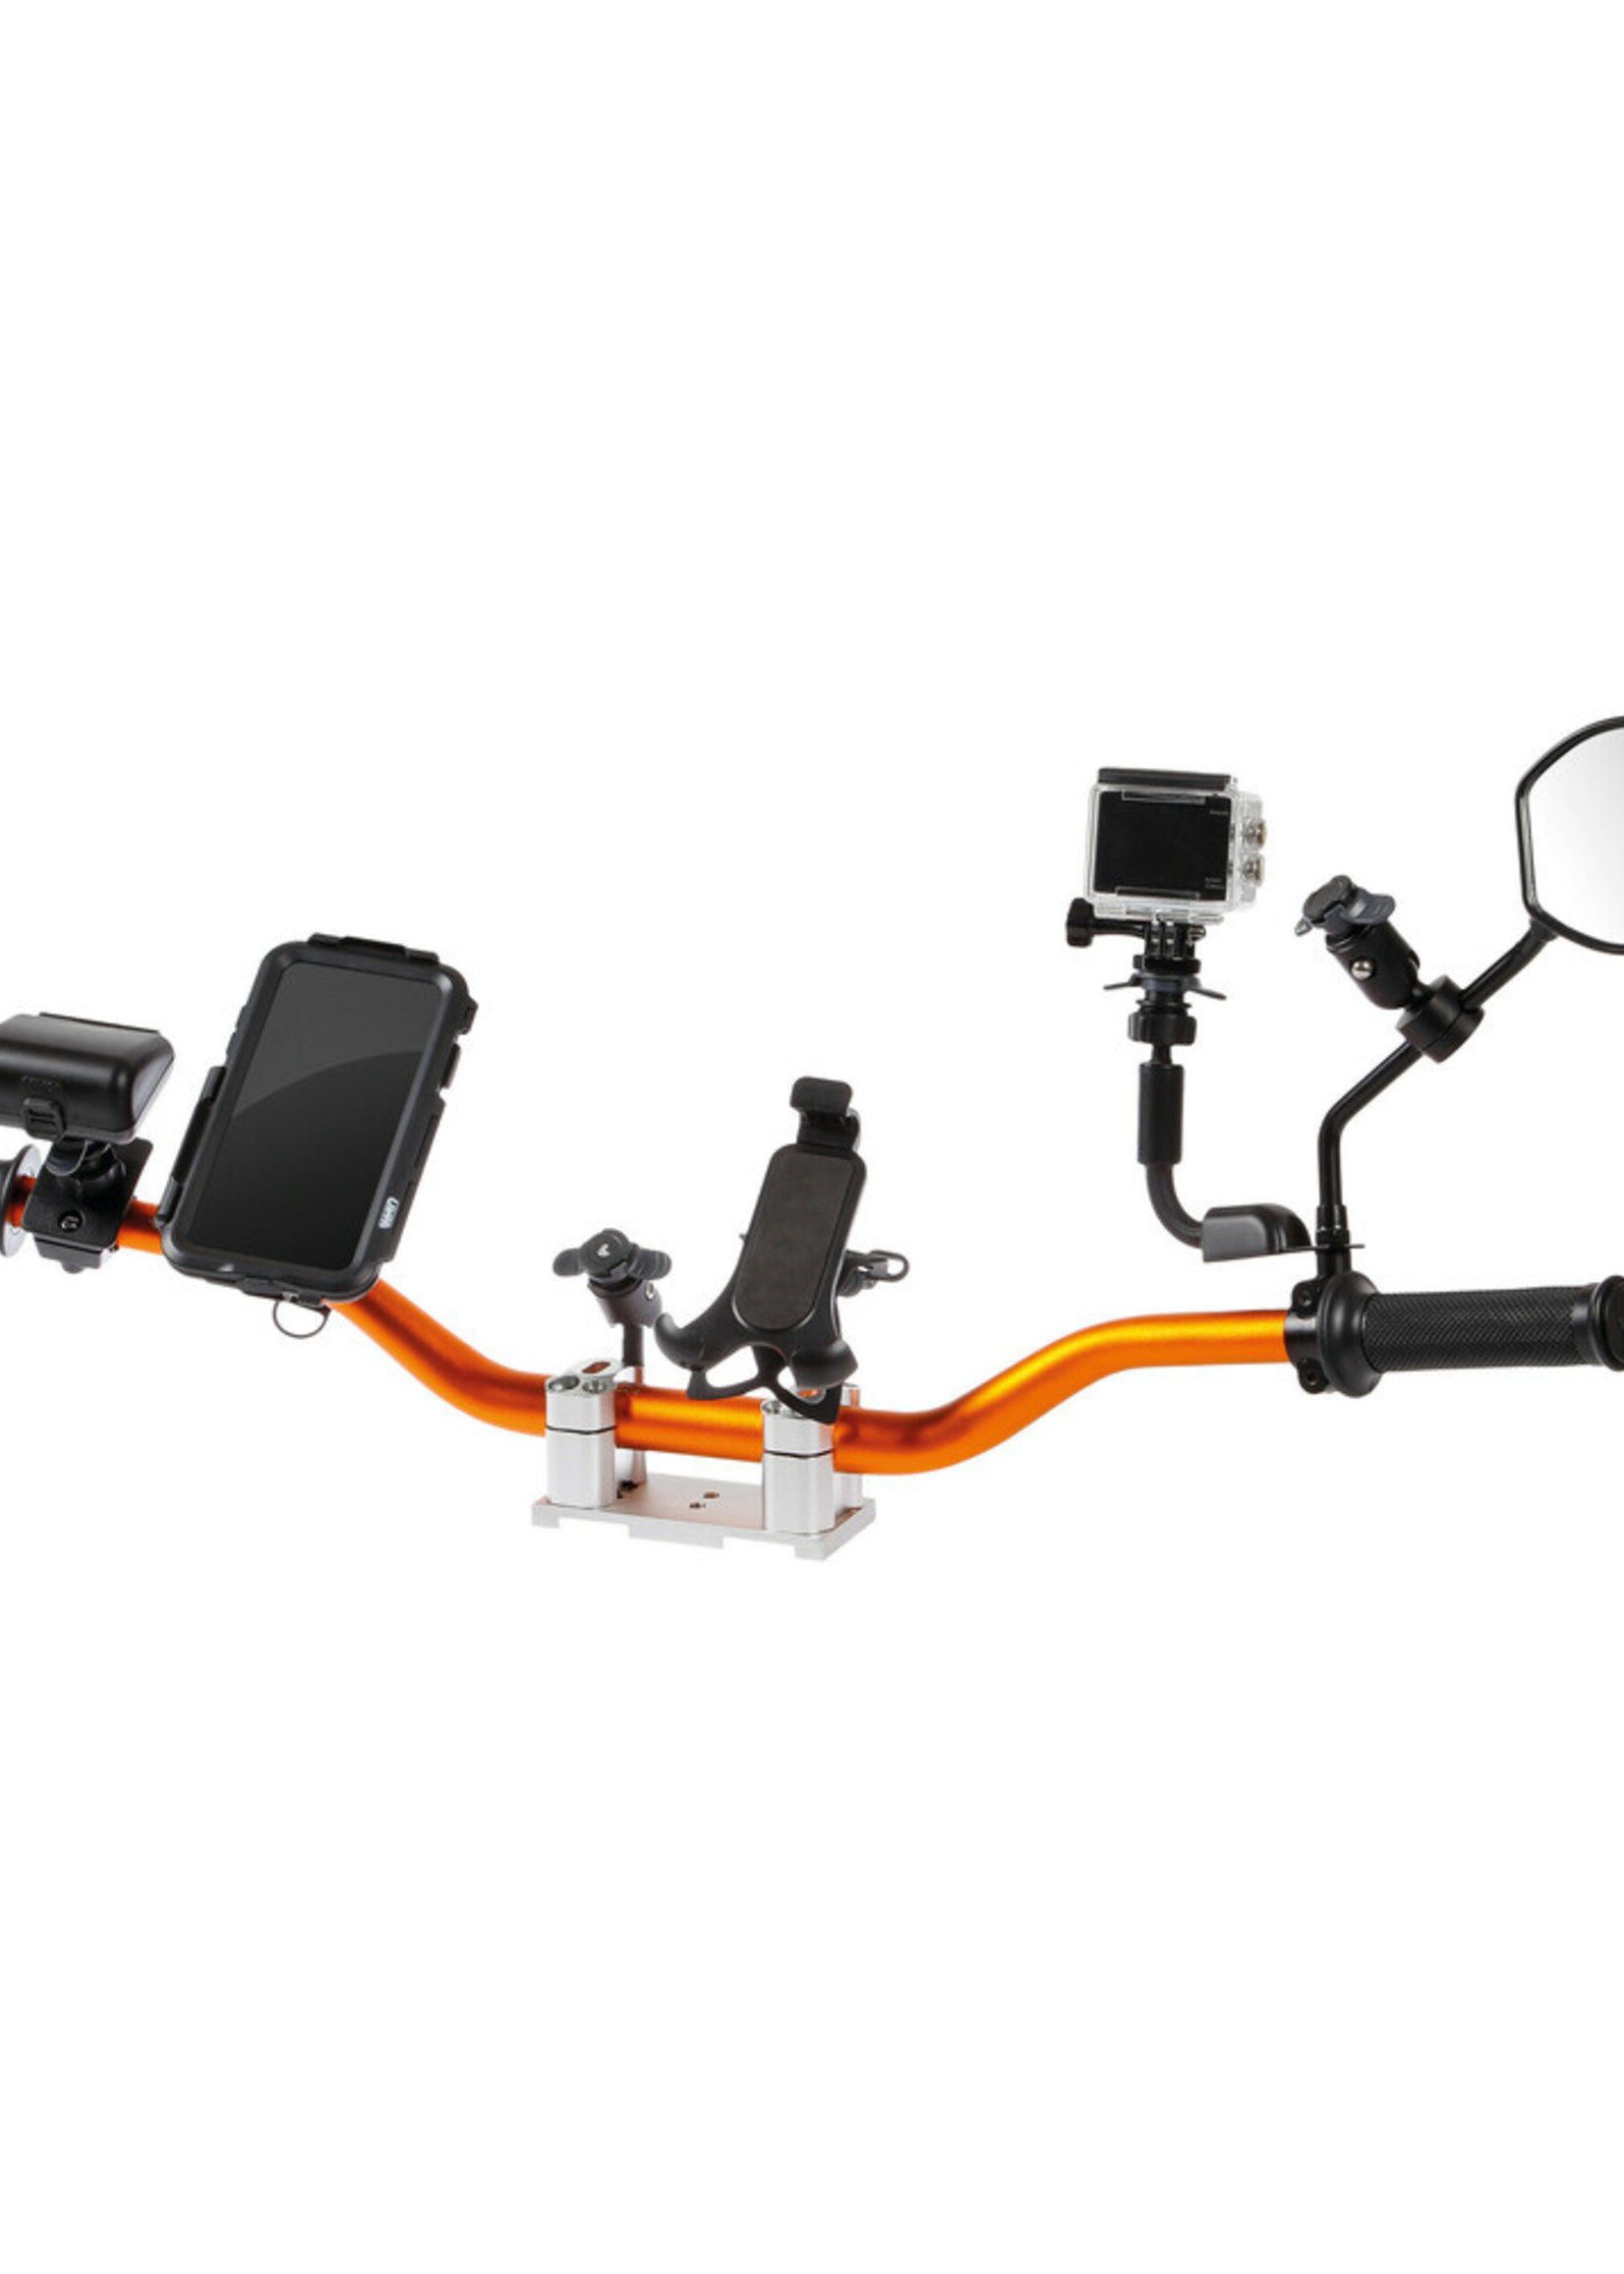 Optiline Bench Display, handlebar with riser for motorcycle products exposure